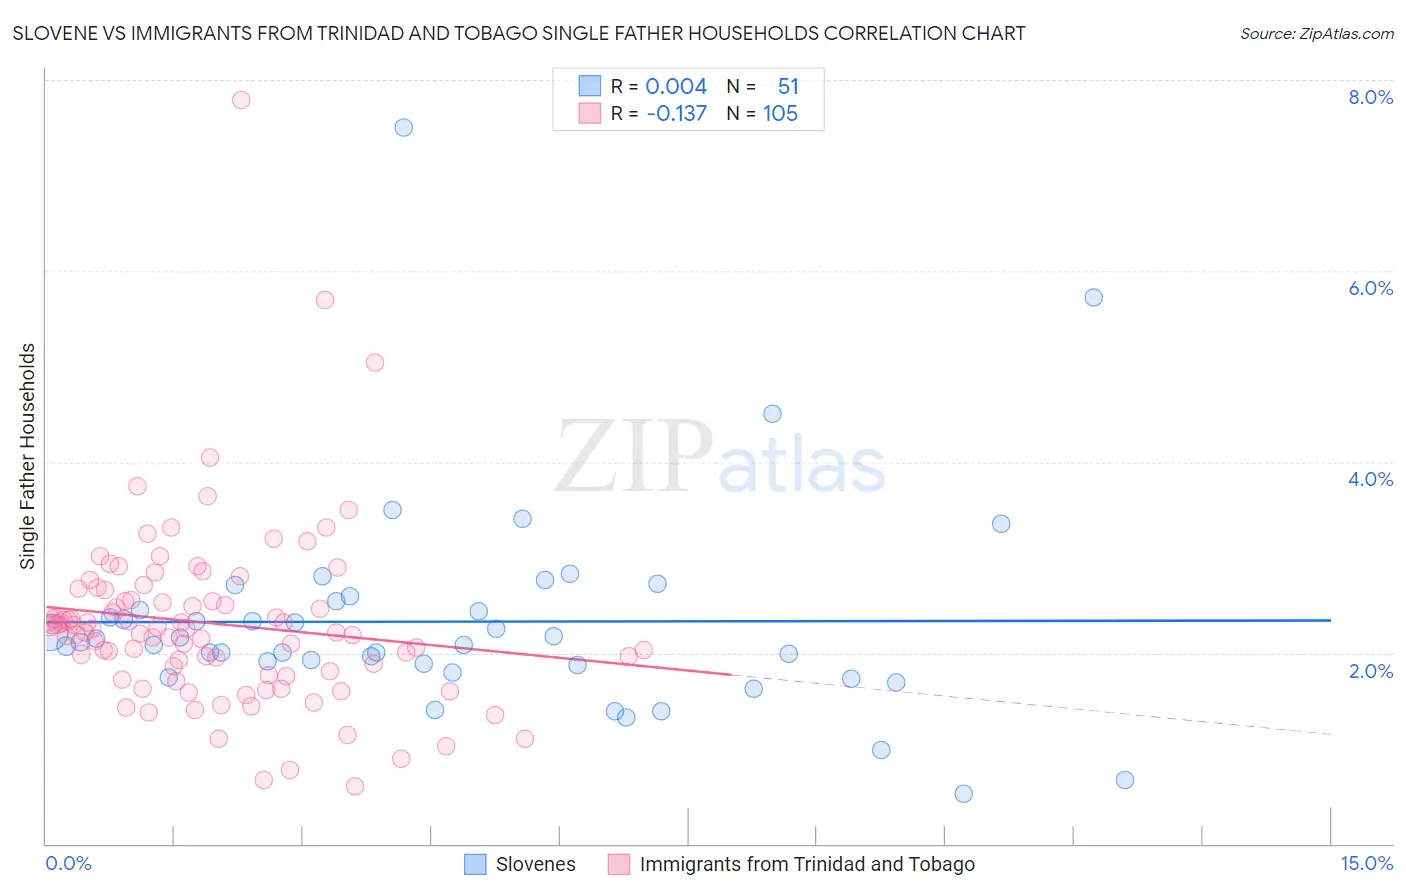 Slovene vs Immigrants from Trinidad and Tobago Single Father Households